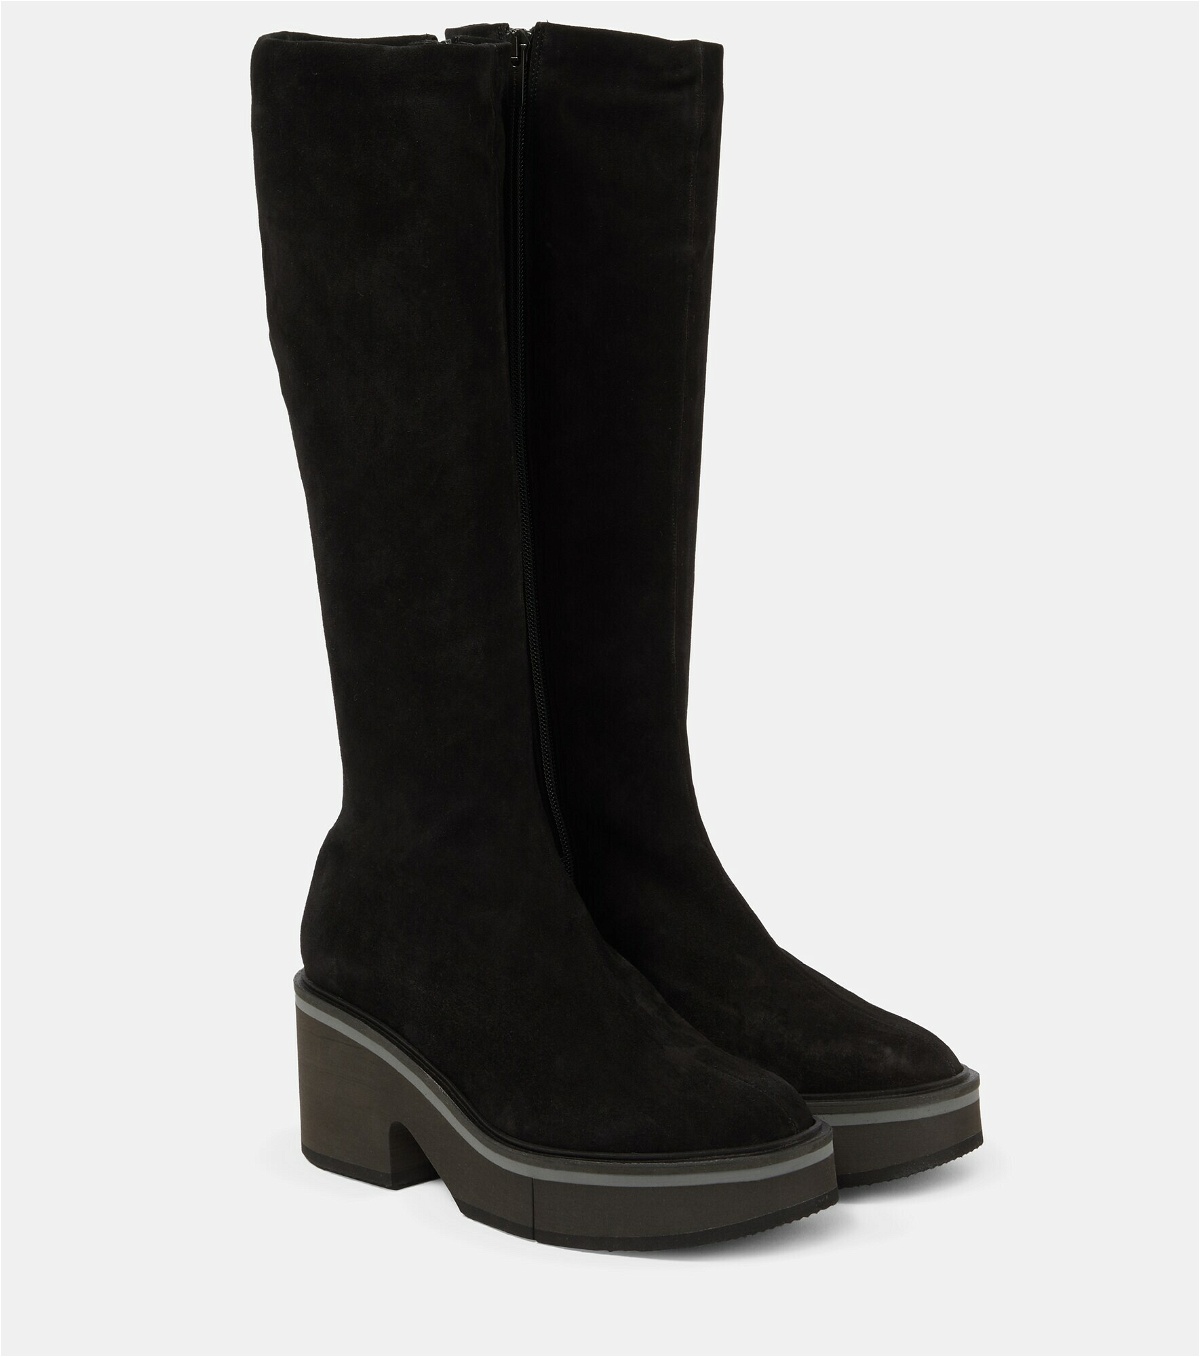 Clergerie - Anki suede knee-high boots Clergerie